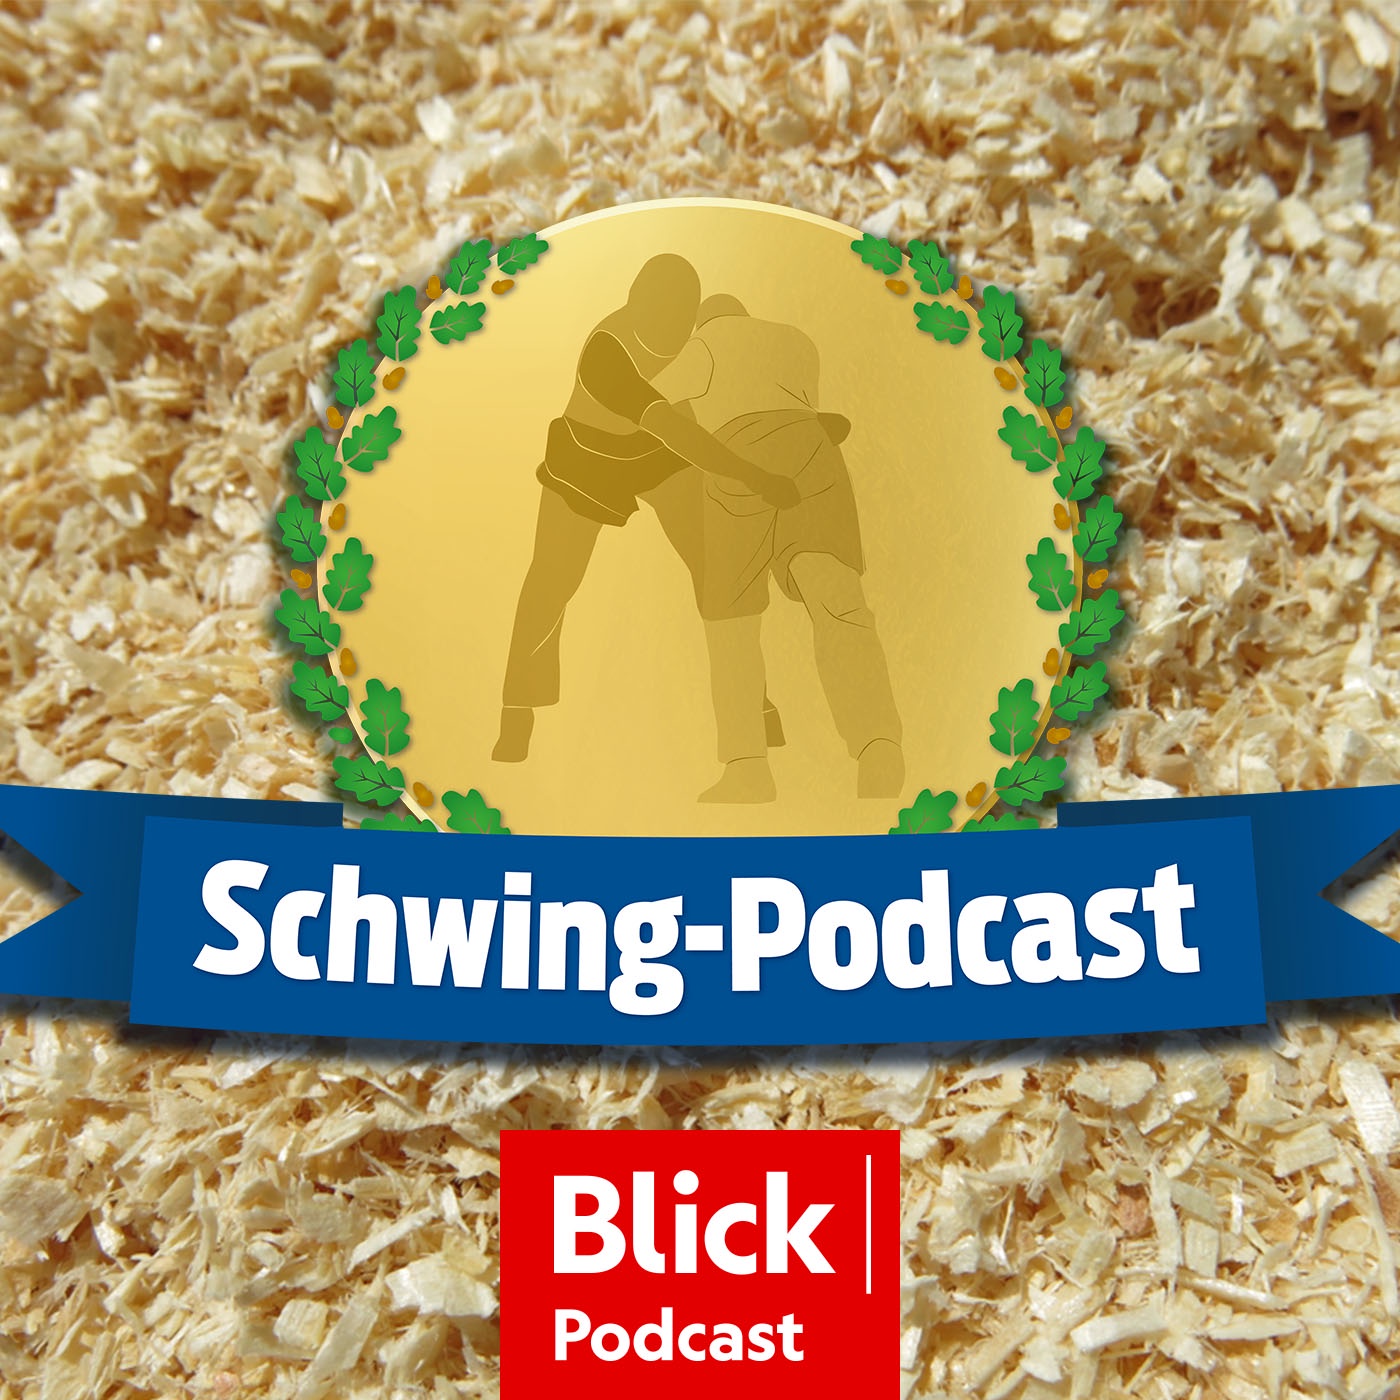 BLICK Schwing-Podcast